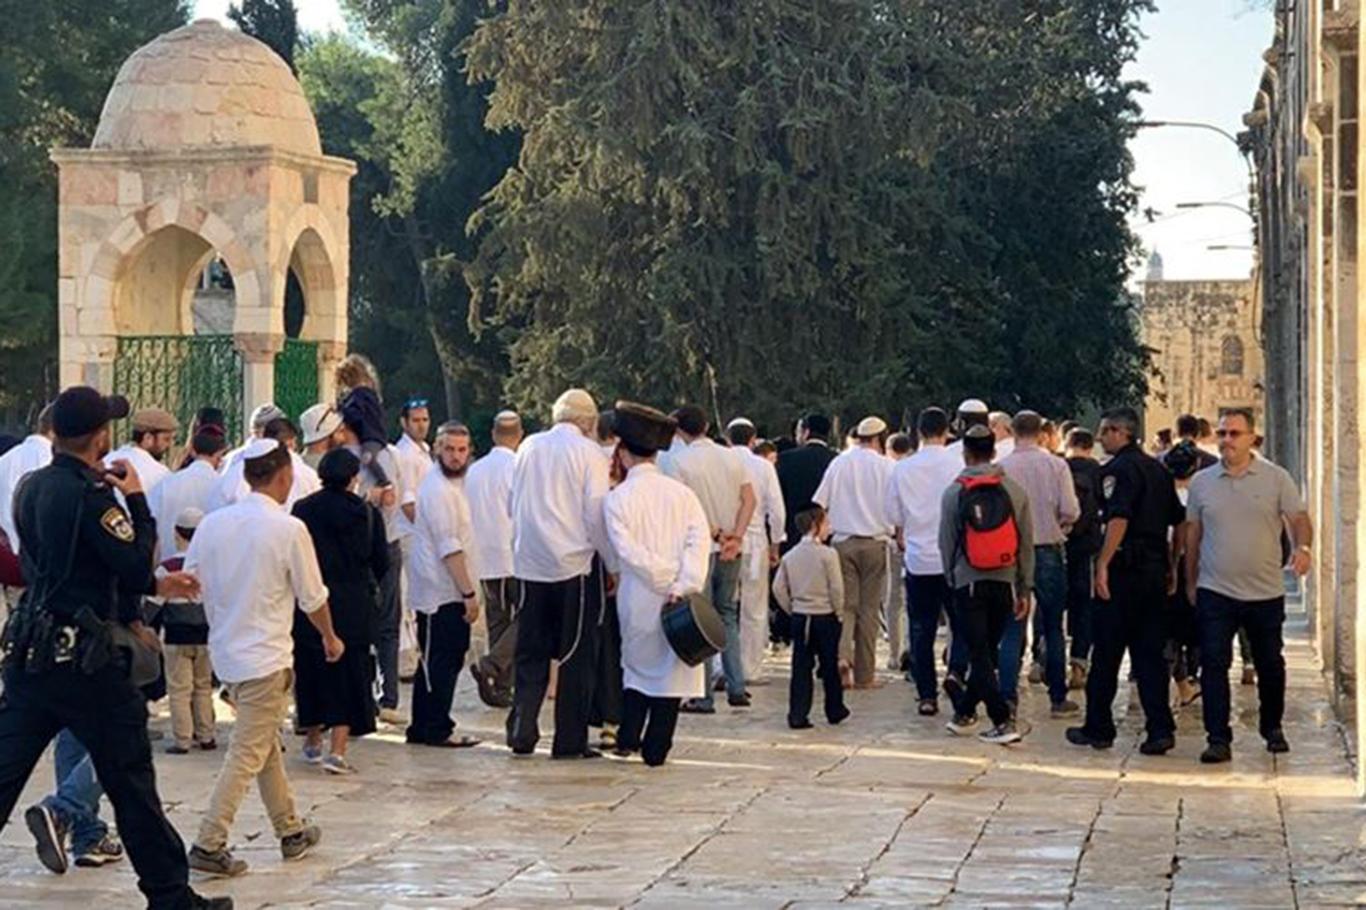 Settlers guarded by police defile Aqsa Mosque in J’lem